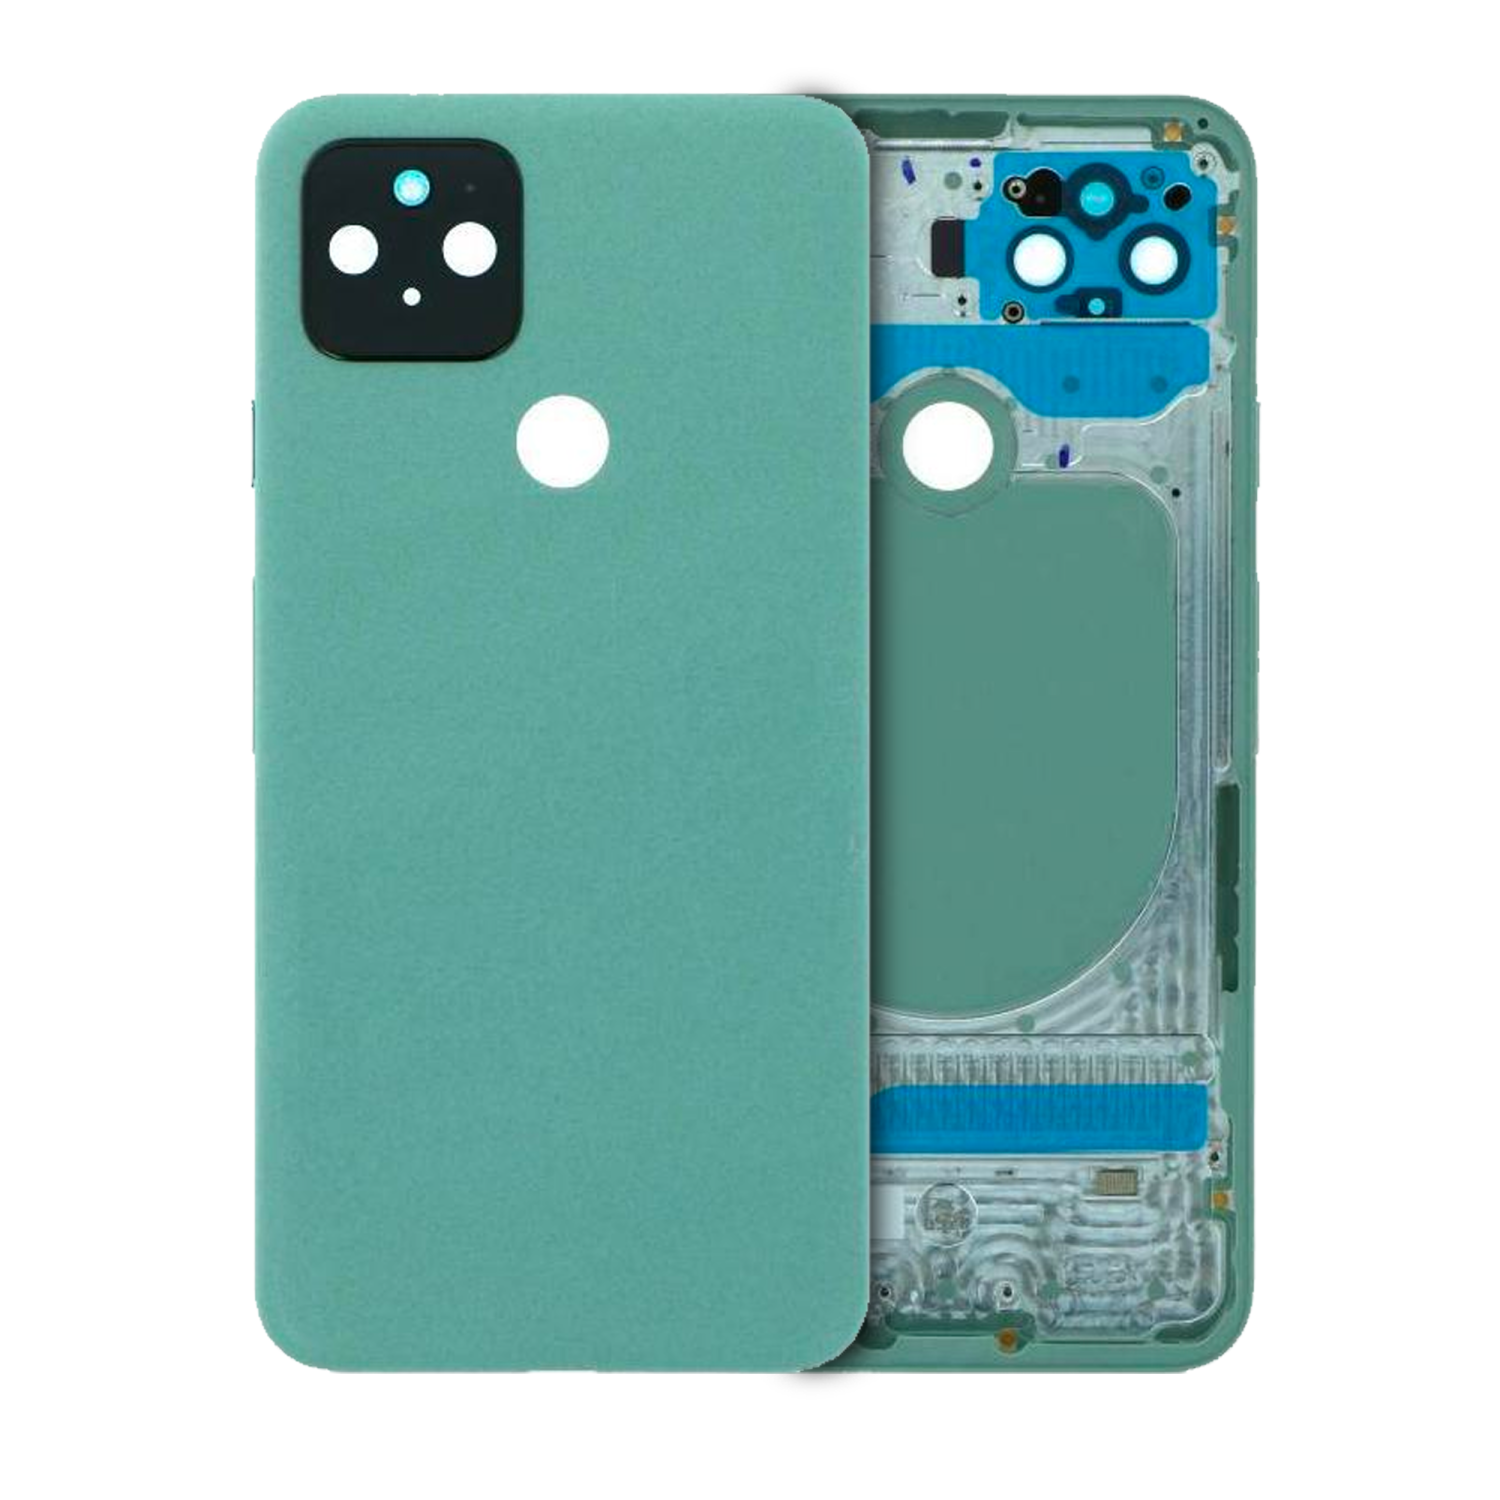 Replacement Housing Assembly Compatible With Google Pixel 5 (Genuine OEM) (US / JP) (Green) (Genuine OEM)